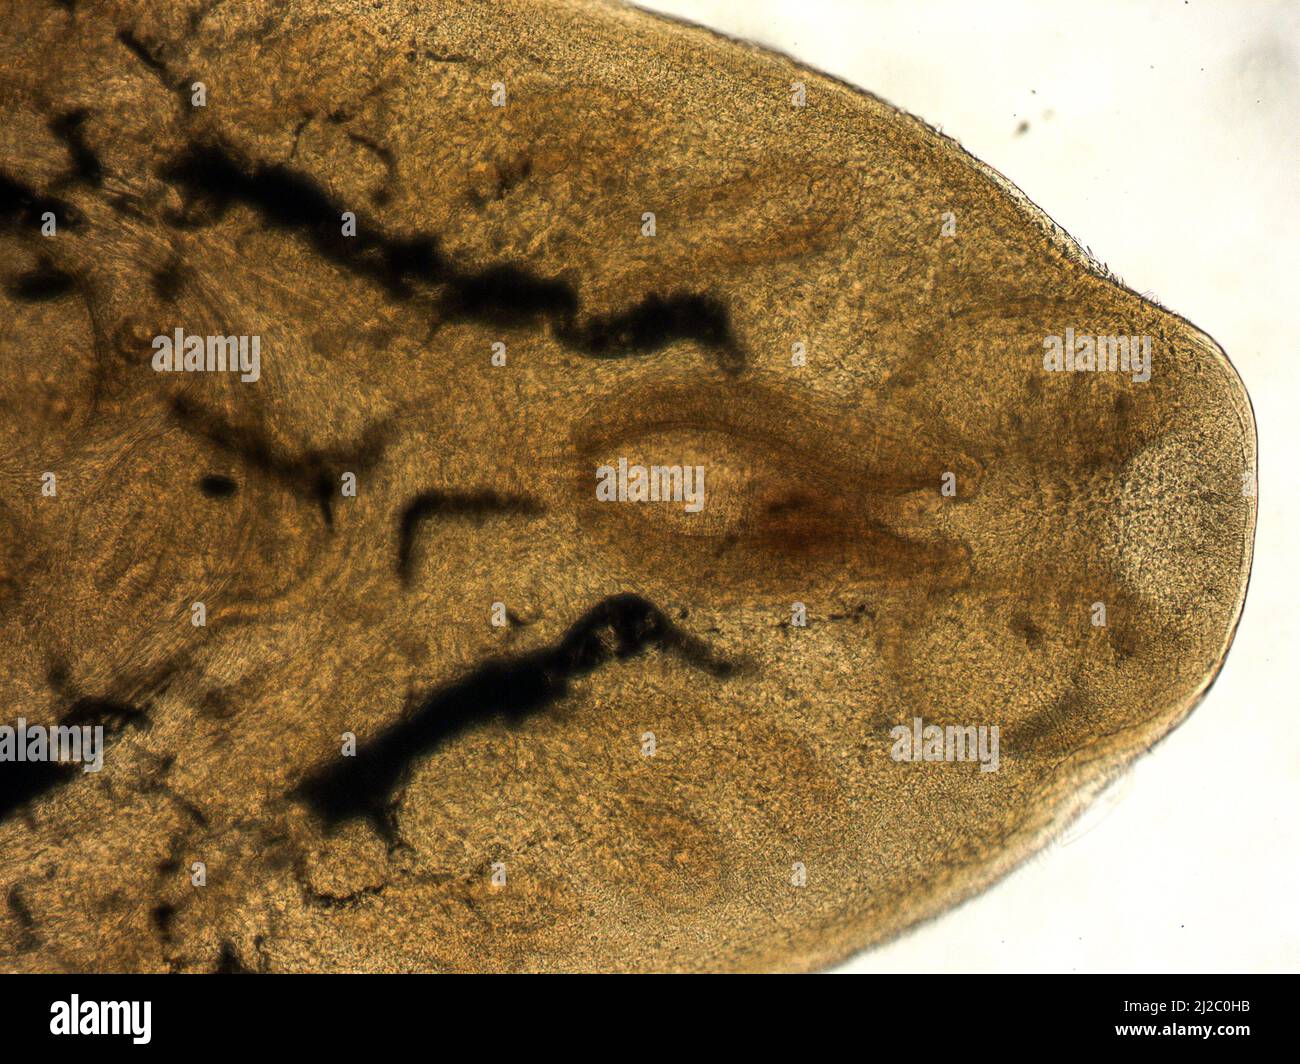 Fasciola Hepatica High Resolution Stock Photography and Images - Alamy